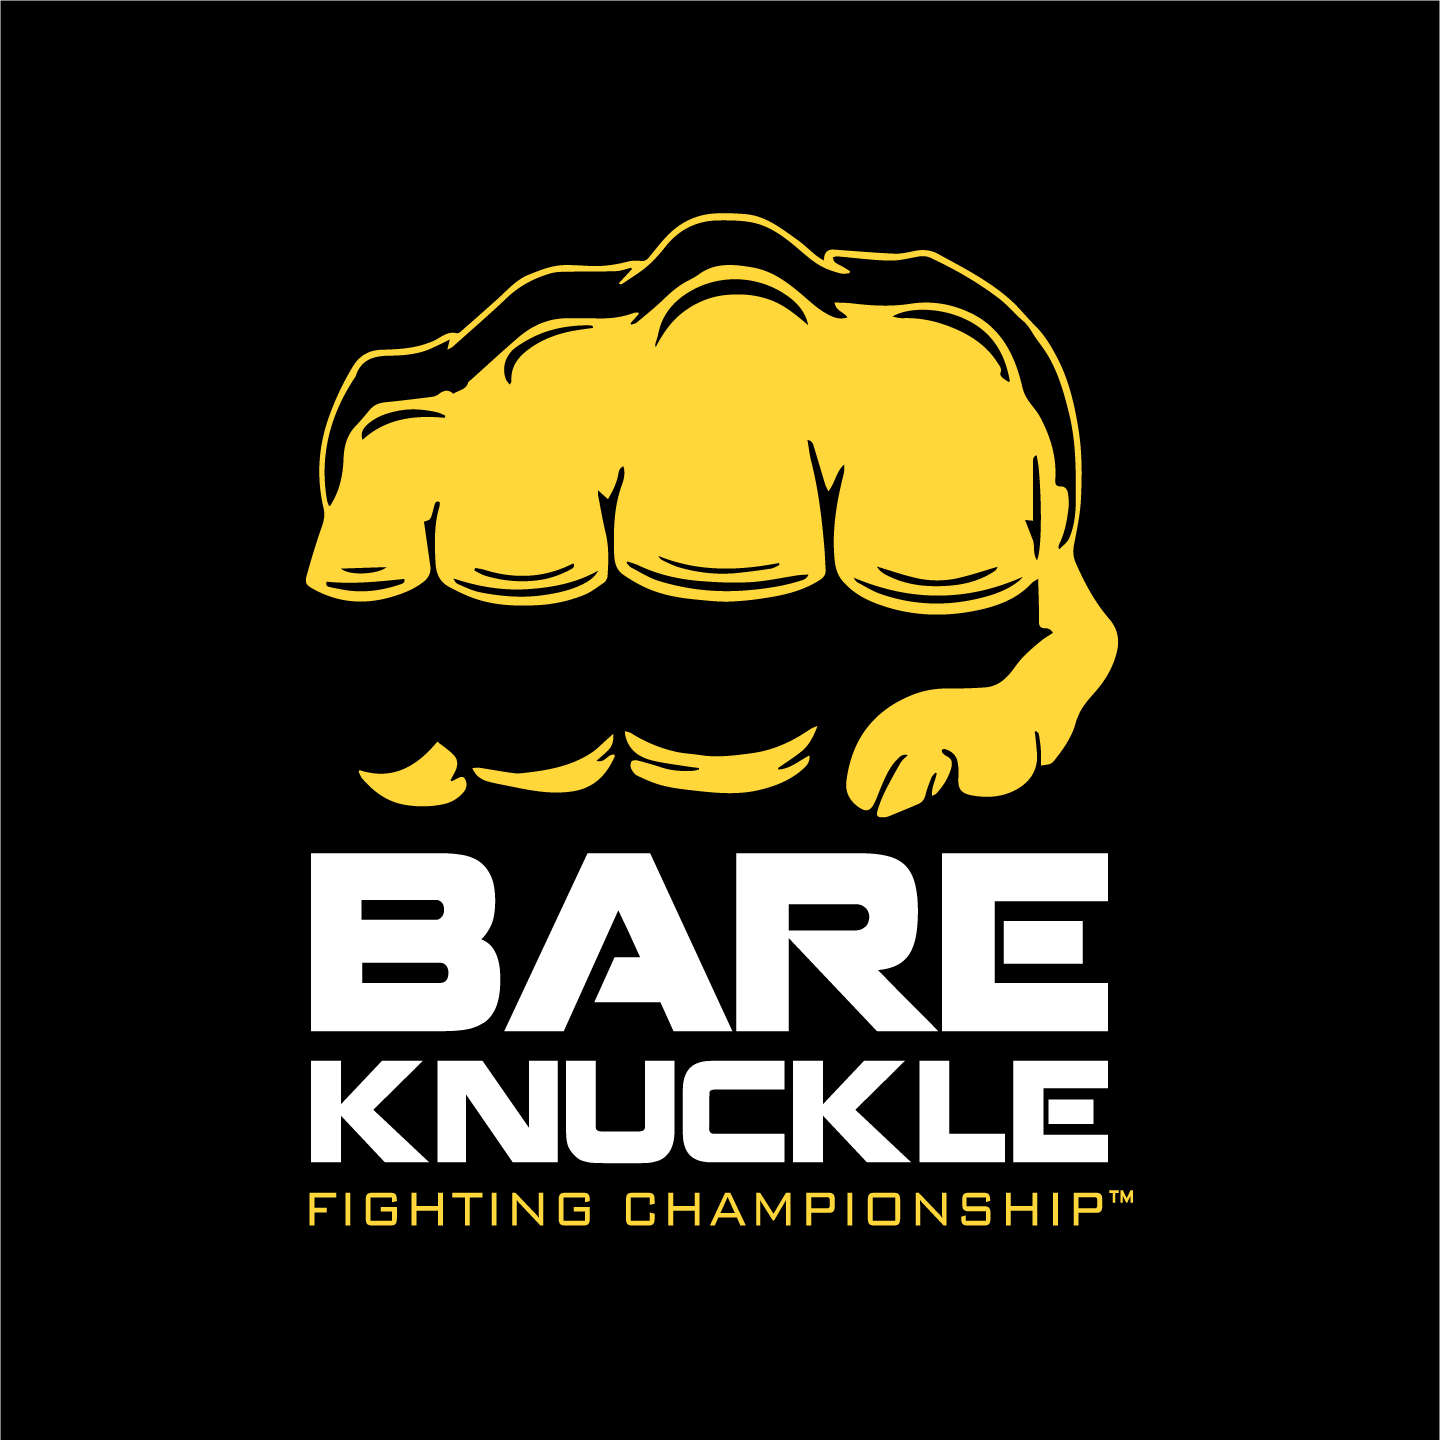 Bare Knuckle Fighting Championship Logo